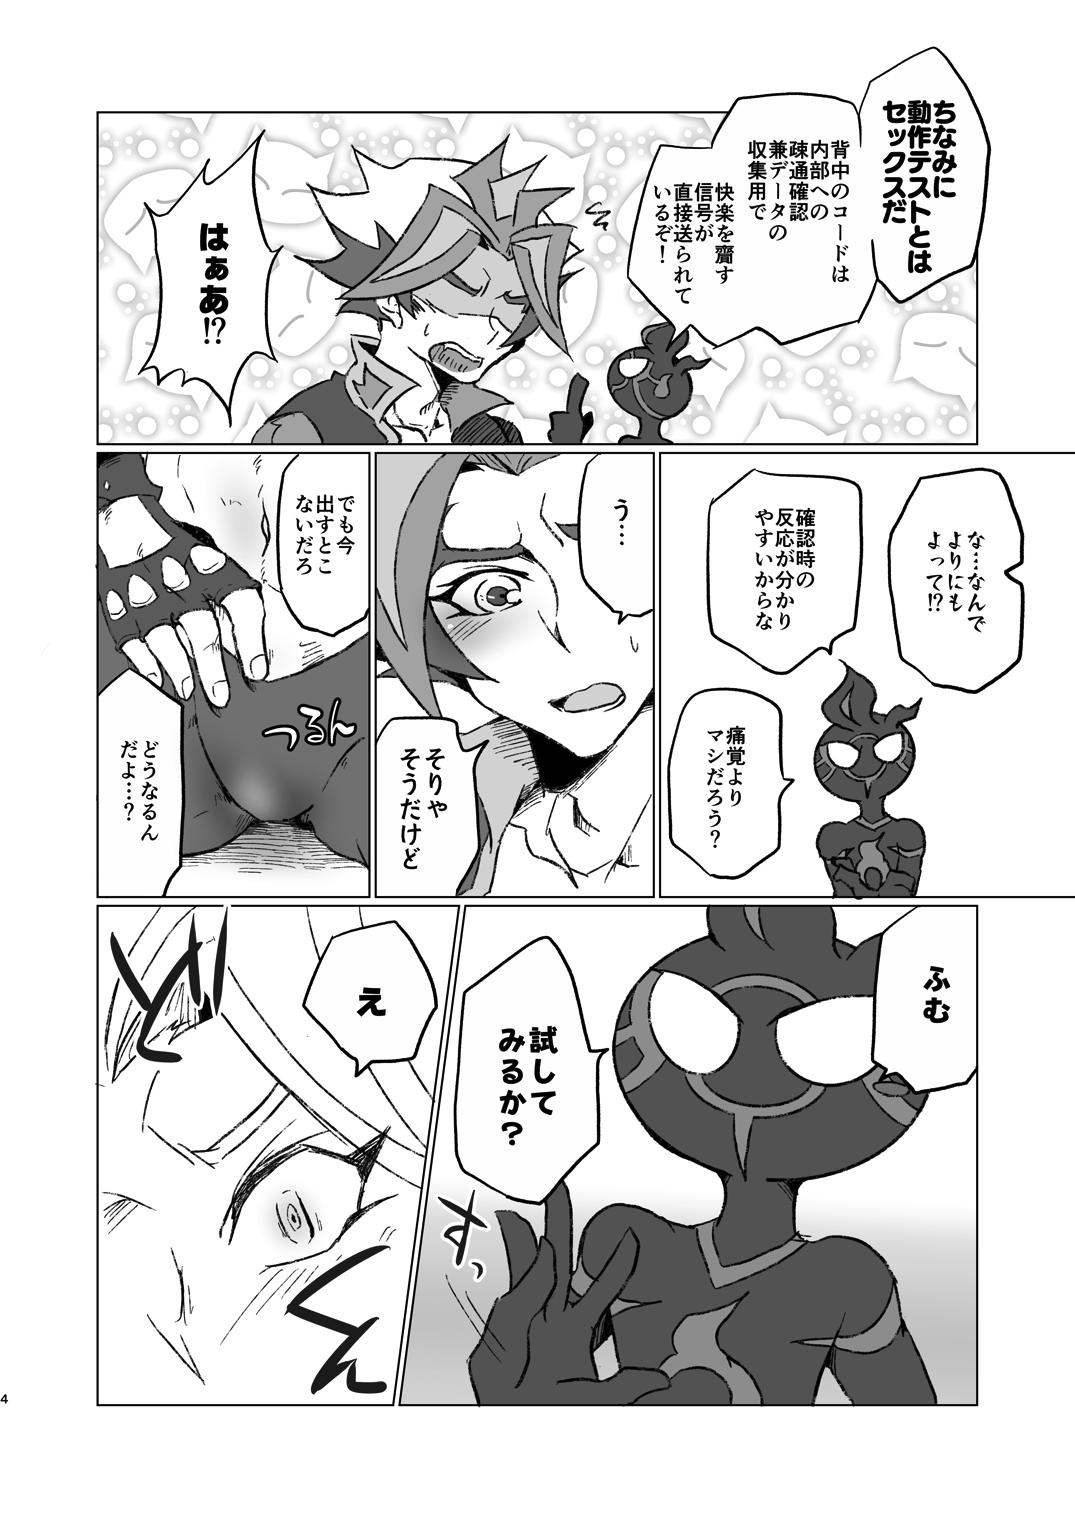 Penetration A little bit further - Yu-gi-oh vrains Hung - Page 3